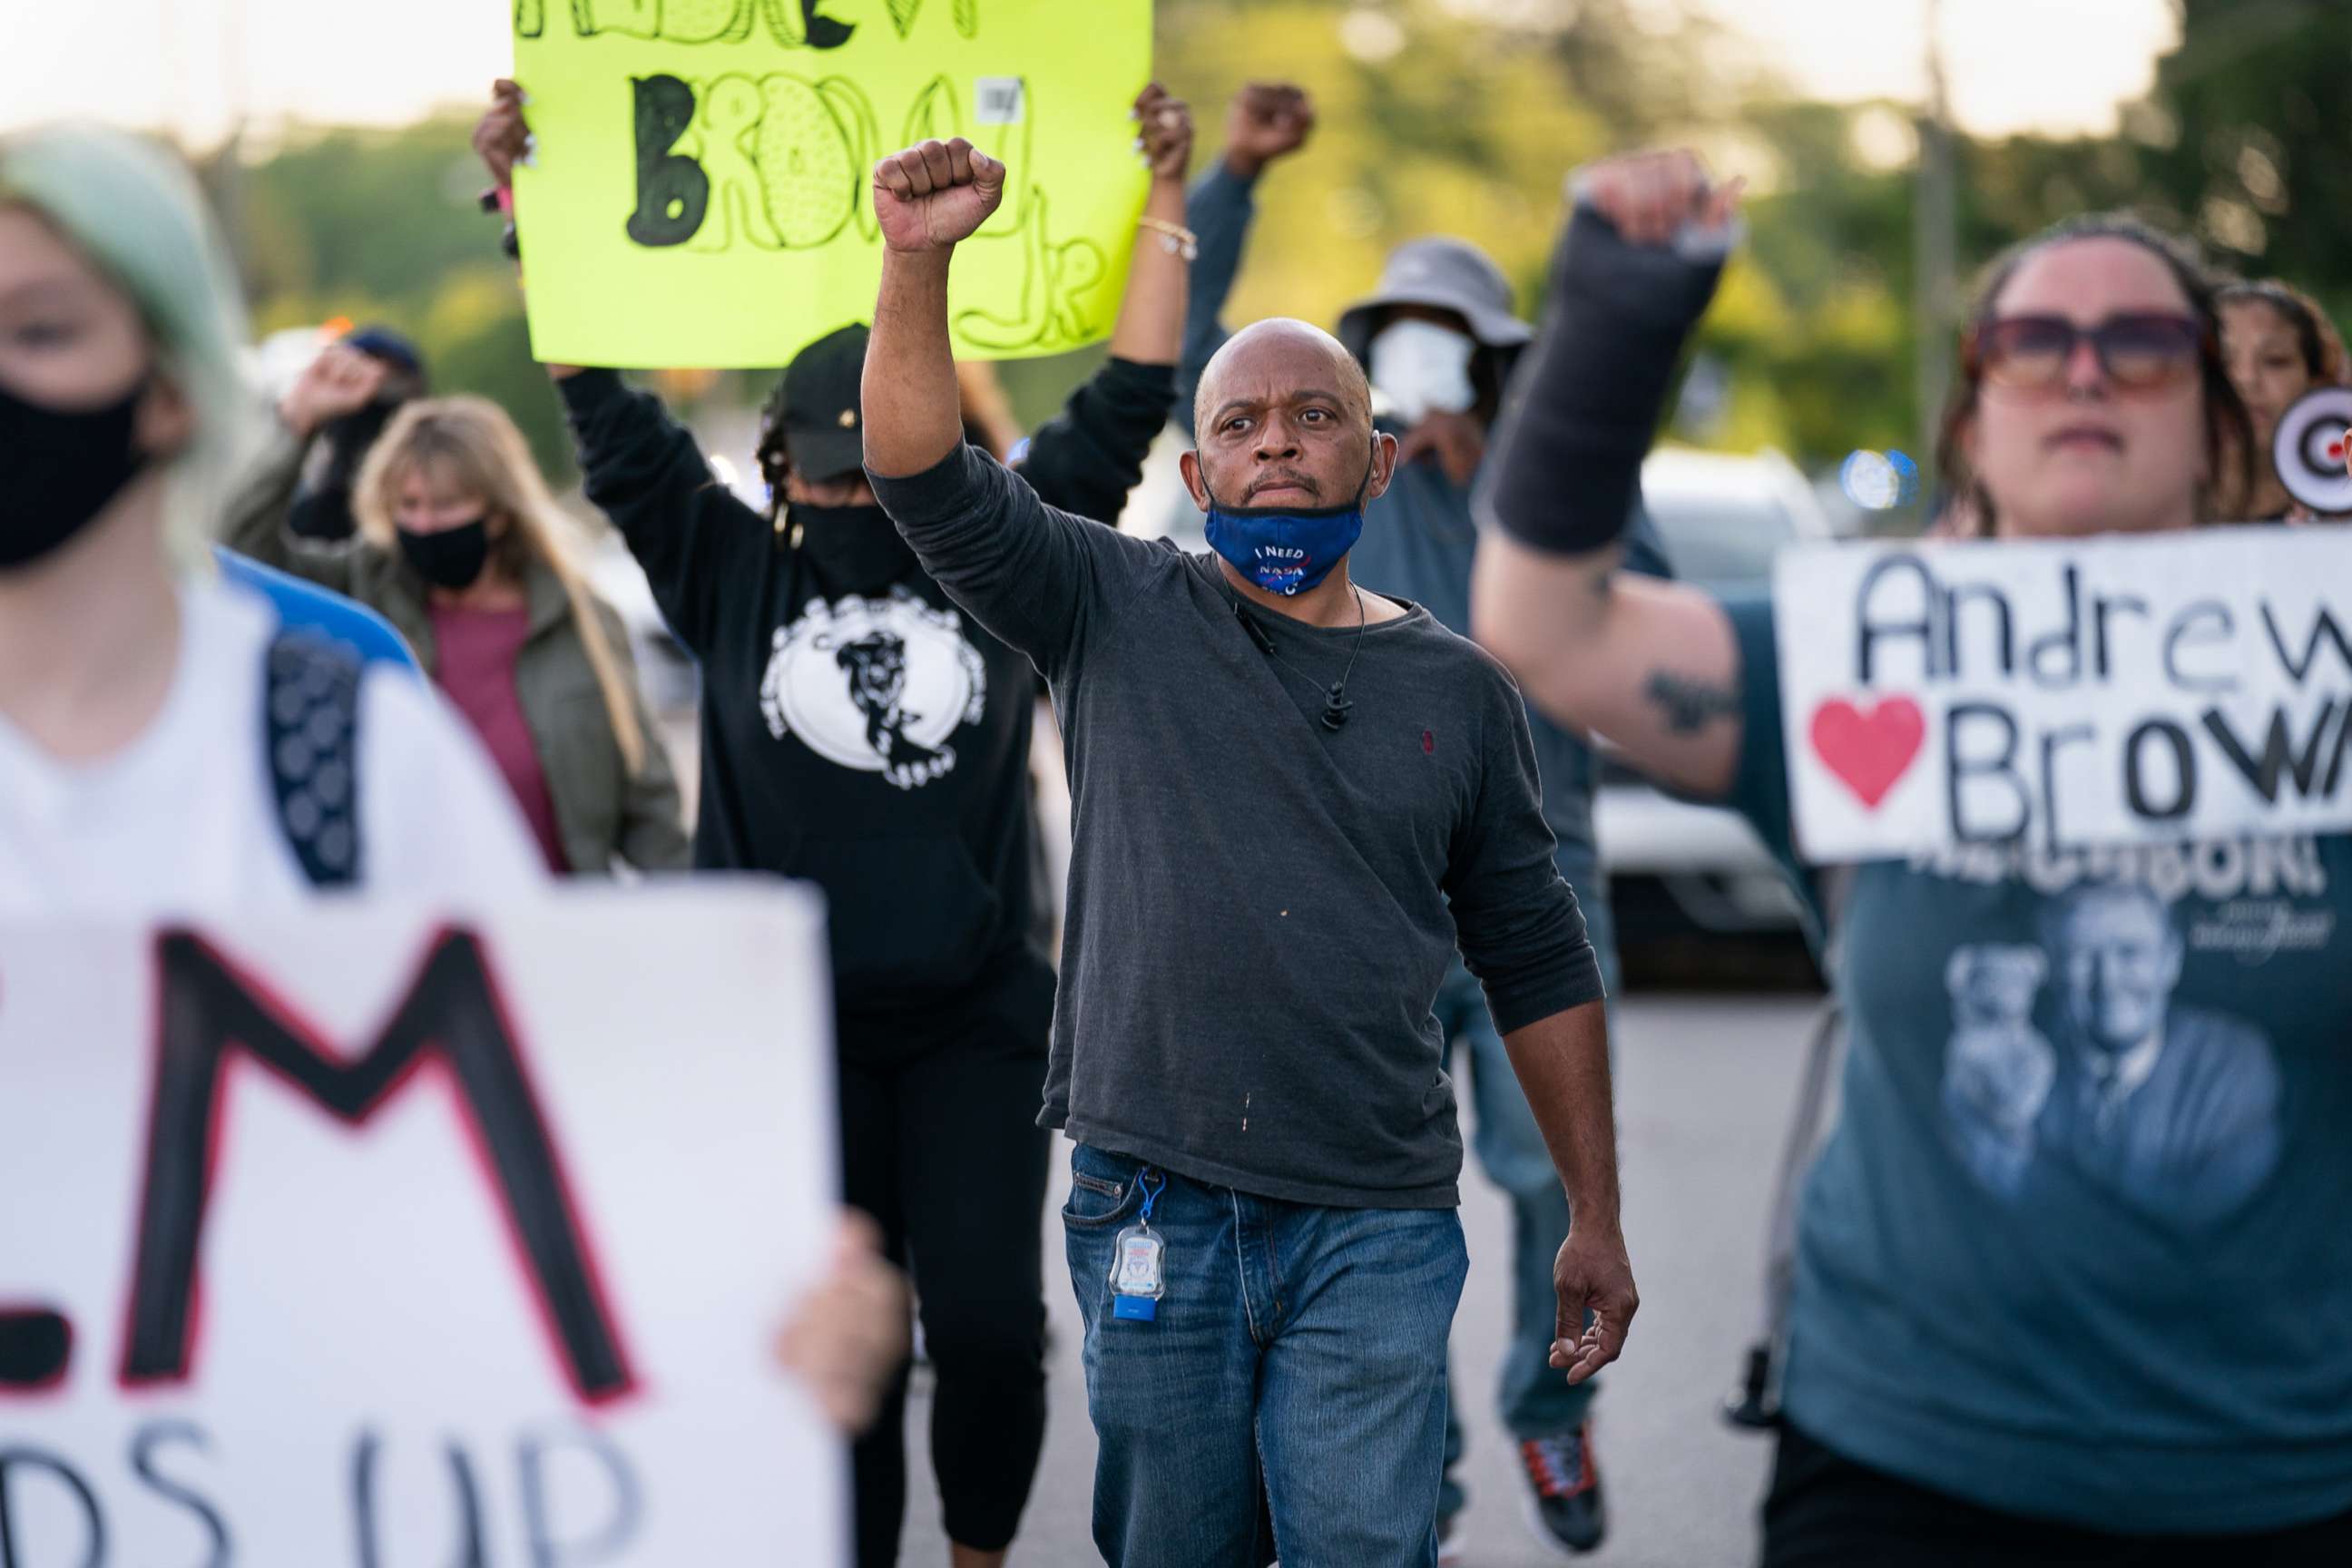 PHOTO: Protestors march in the street after a news conference addressing police video footage of the shooting death of Andrew Brown Jr., May 11, 2021, in Elizabeth City, N.C.